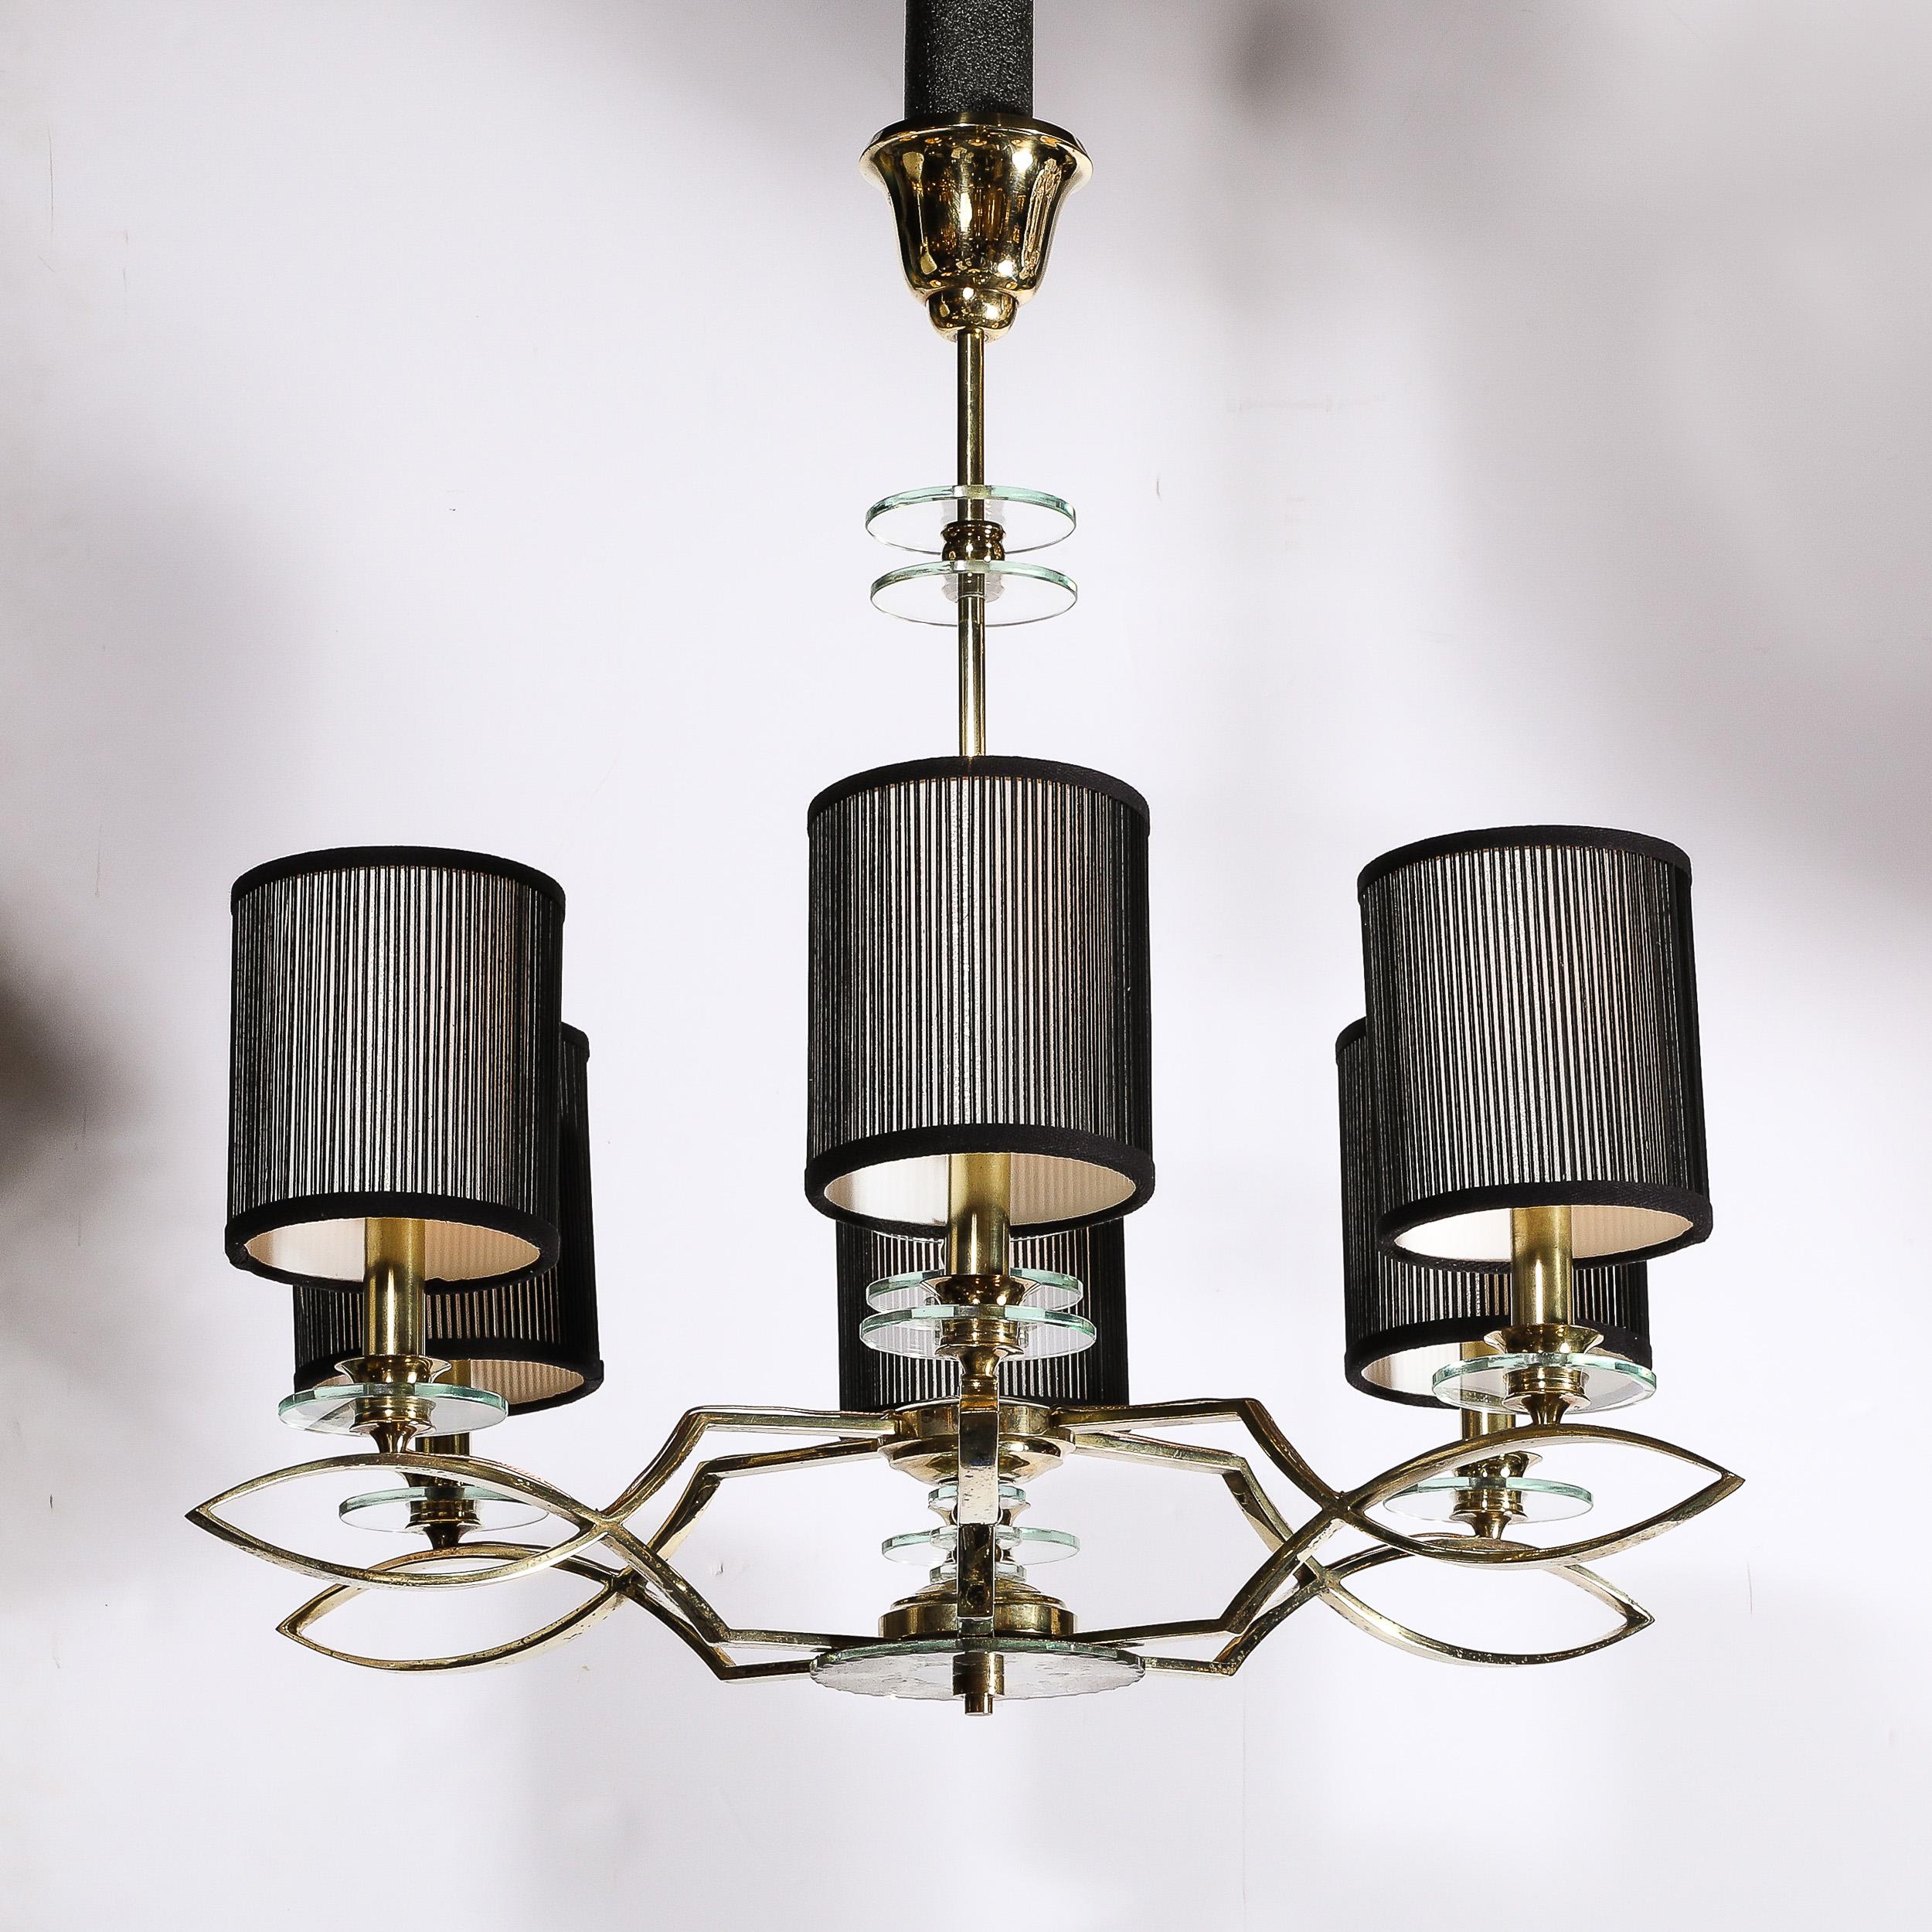 This glamorous yet reserved Mid-Century Modernist Six Arm Chandelier in Brass, Glass, and Antiqued Mirror originates from France, Circa 1950. Featuring a brass laticework frame of intersecting curves and right angles, round transparent glass disks